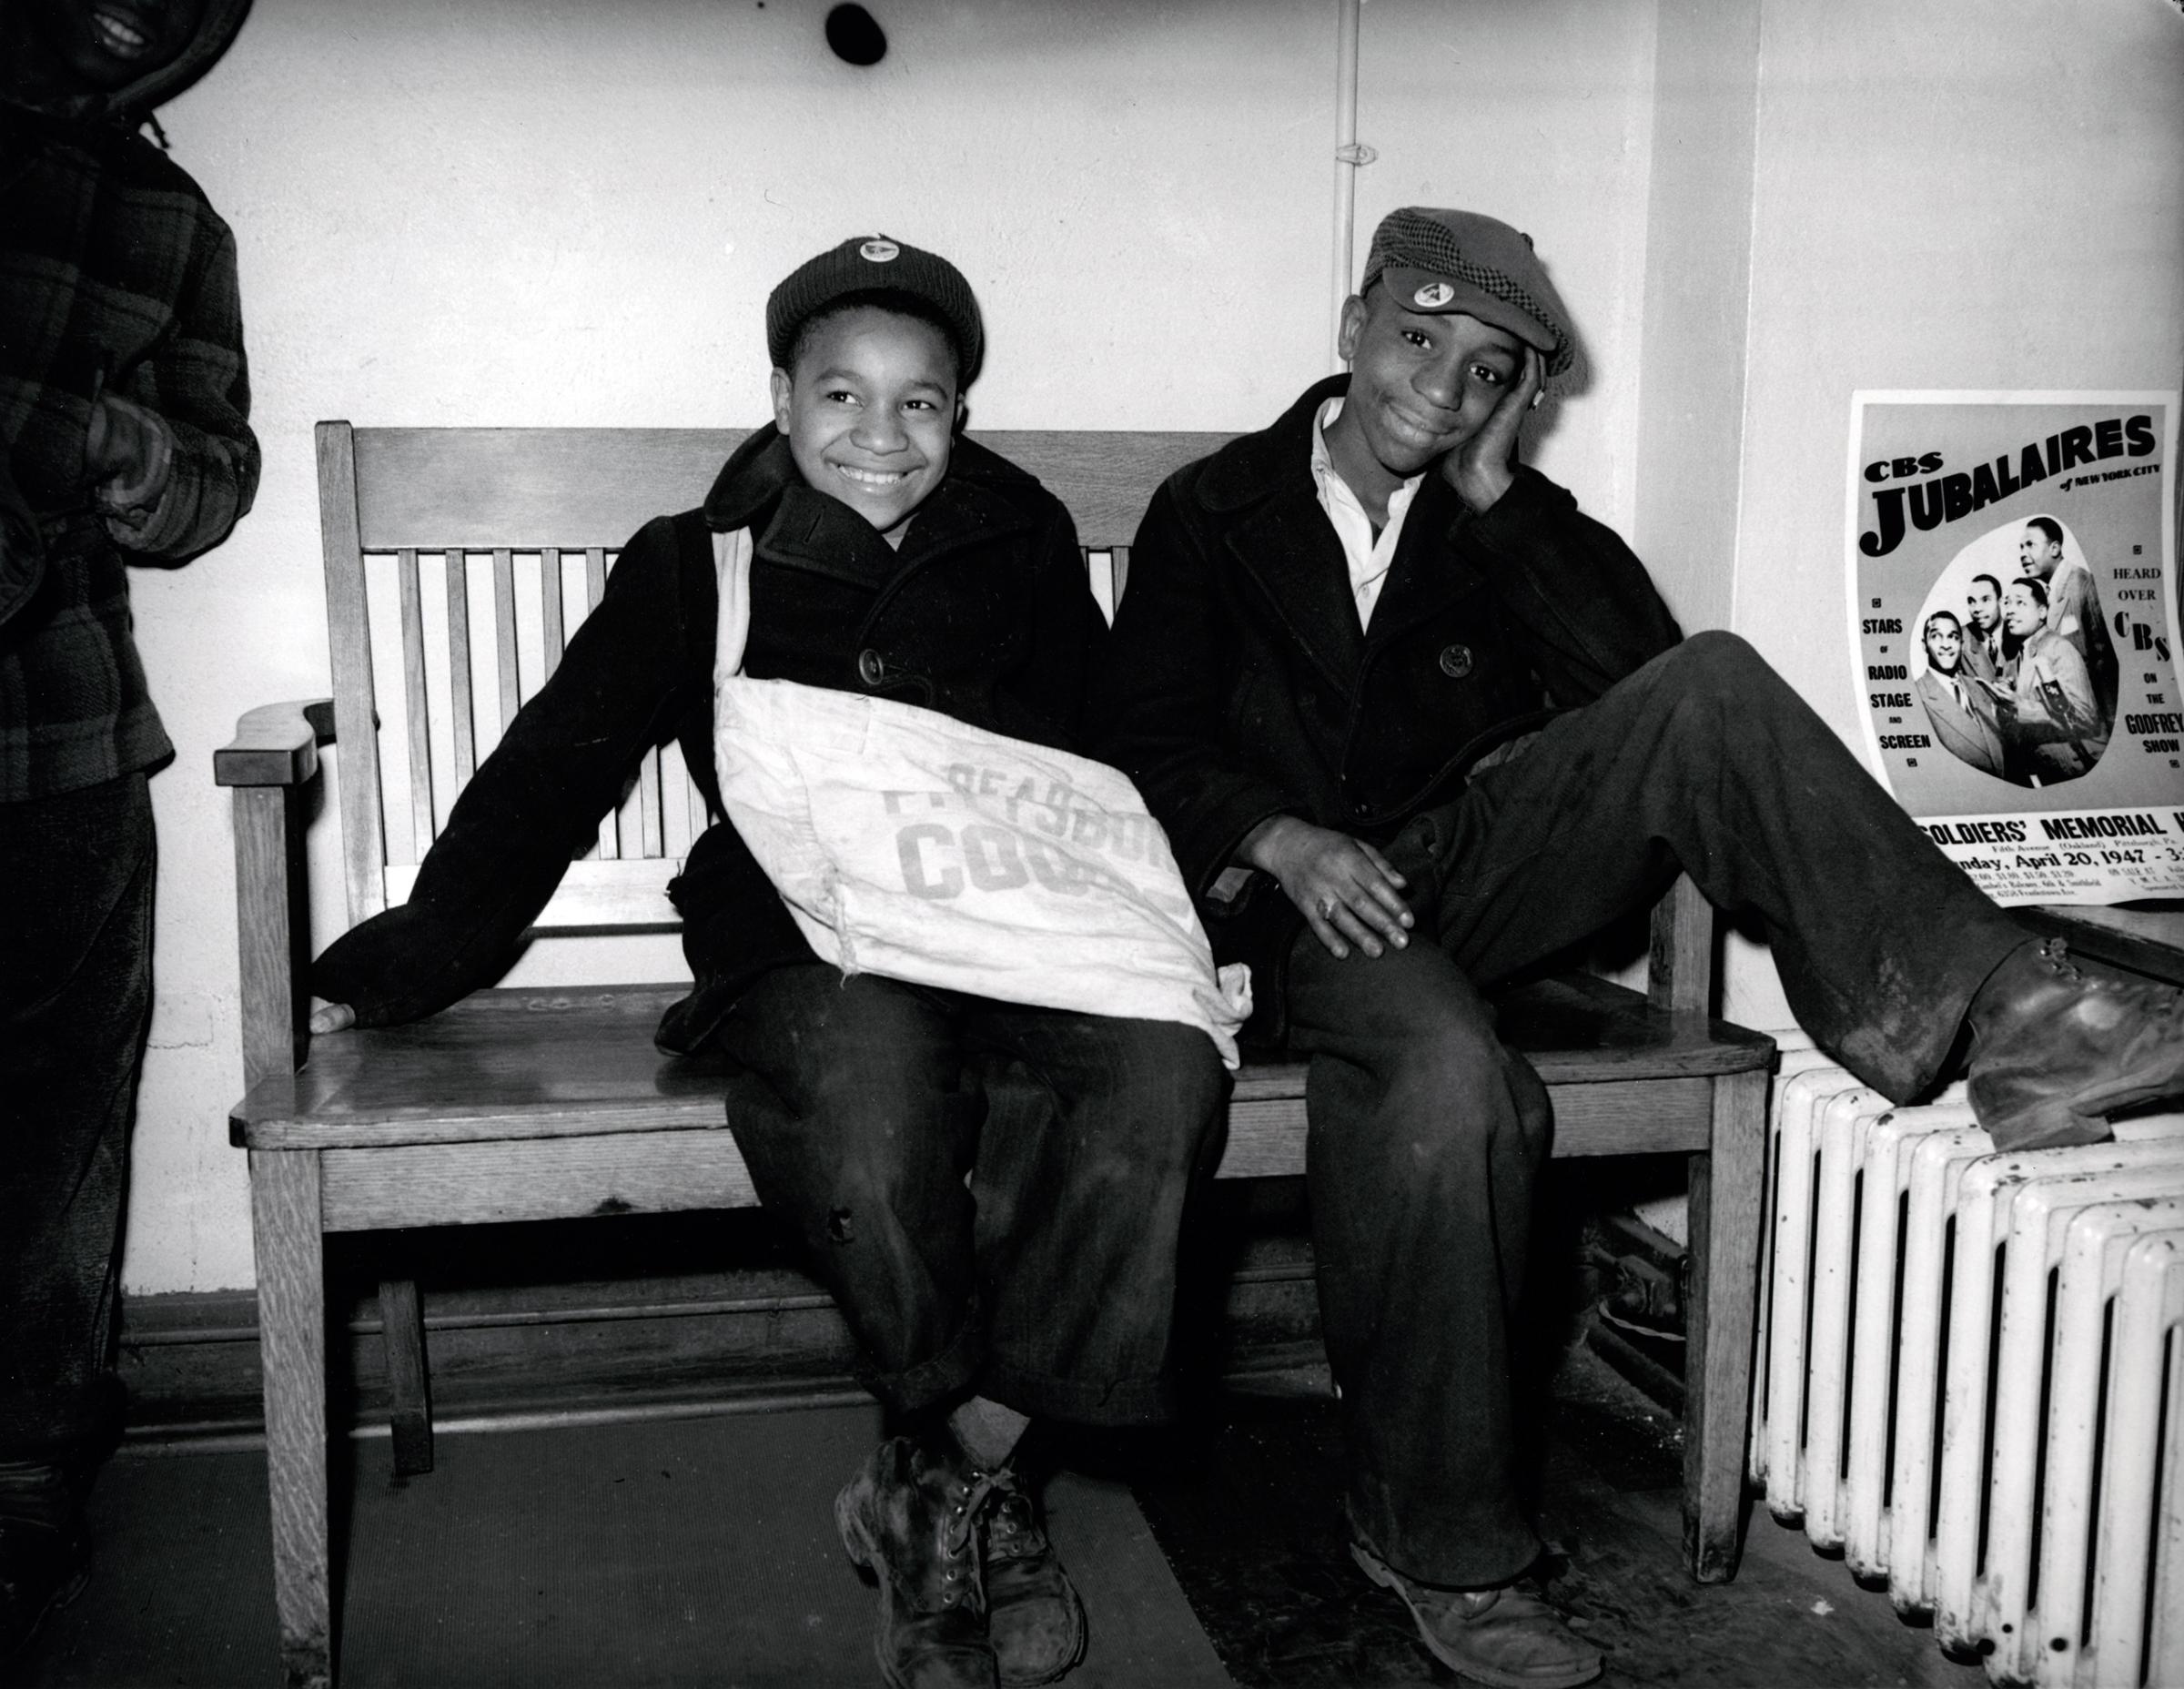 Two paper boys sitting on a bench, 1947.